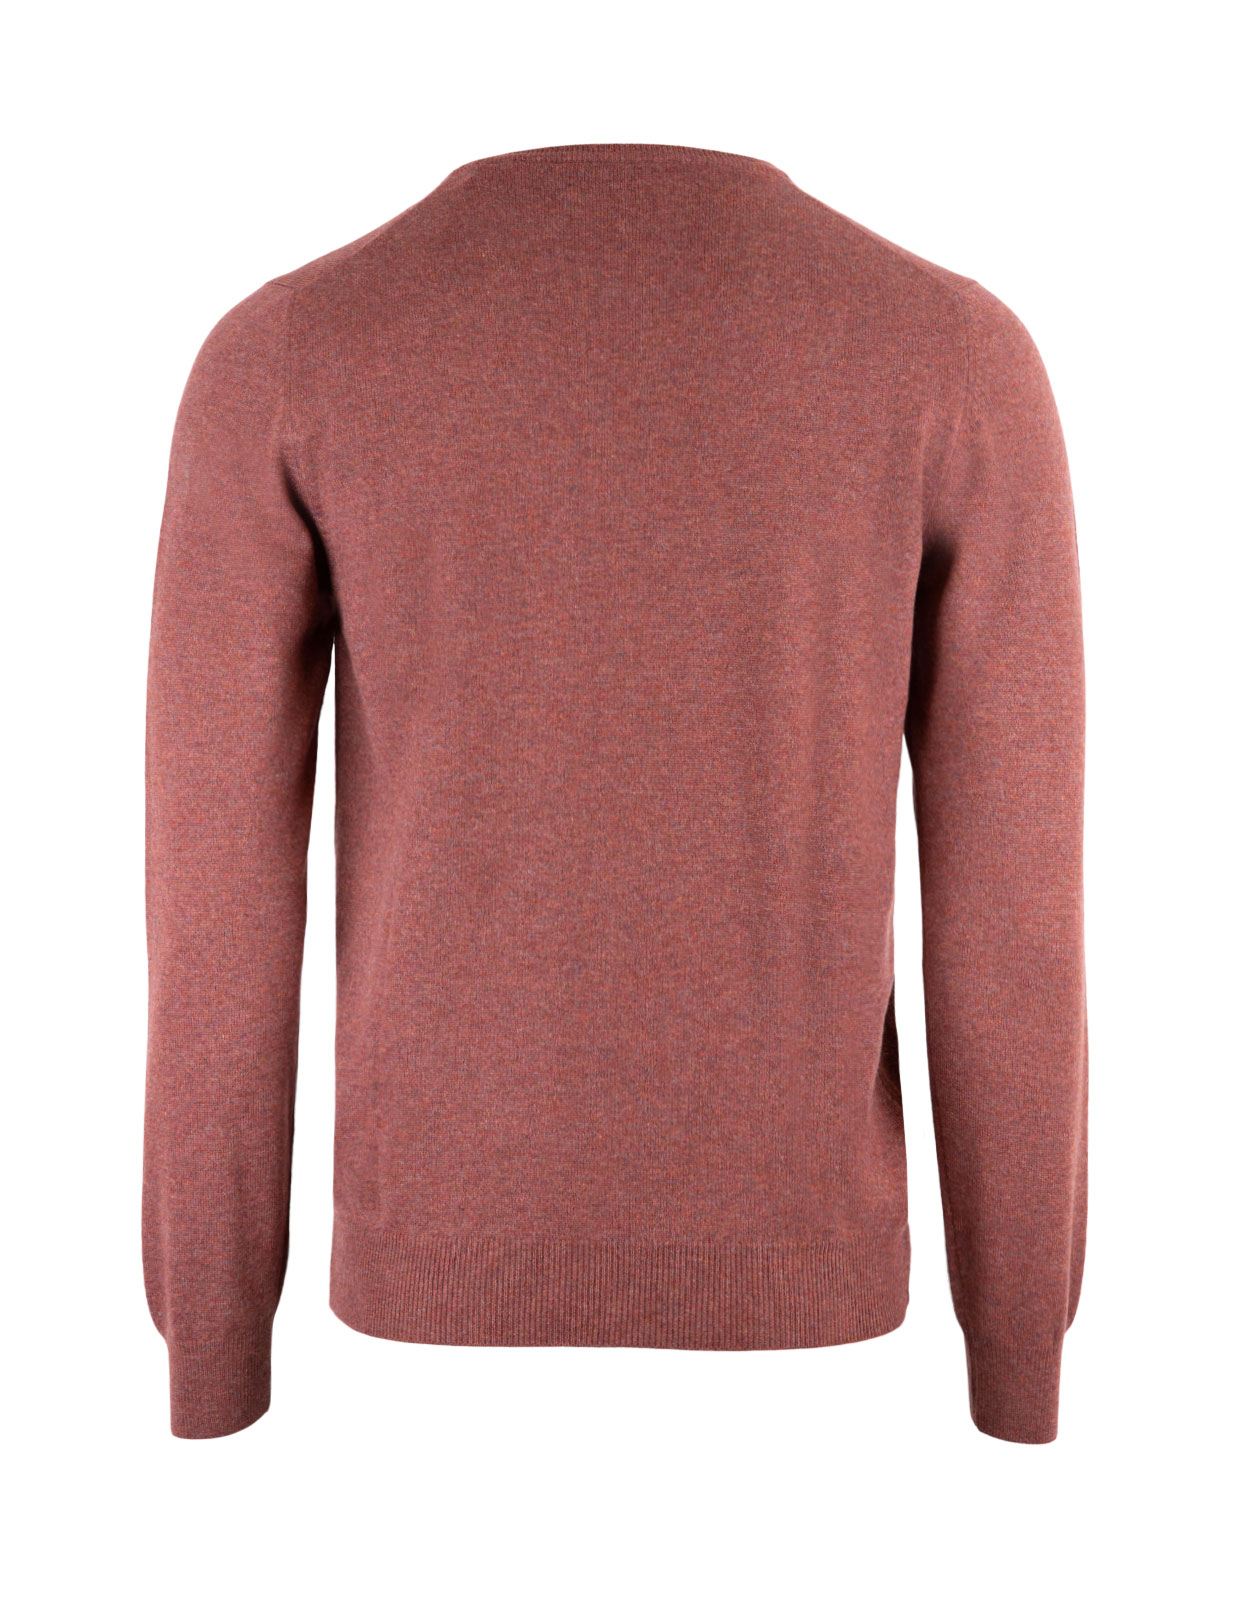 Crew Neck Wool & Cashmere Dusty Red